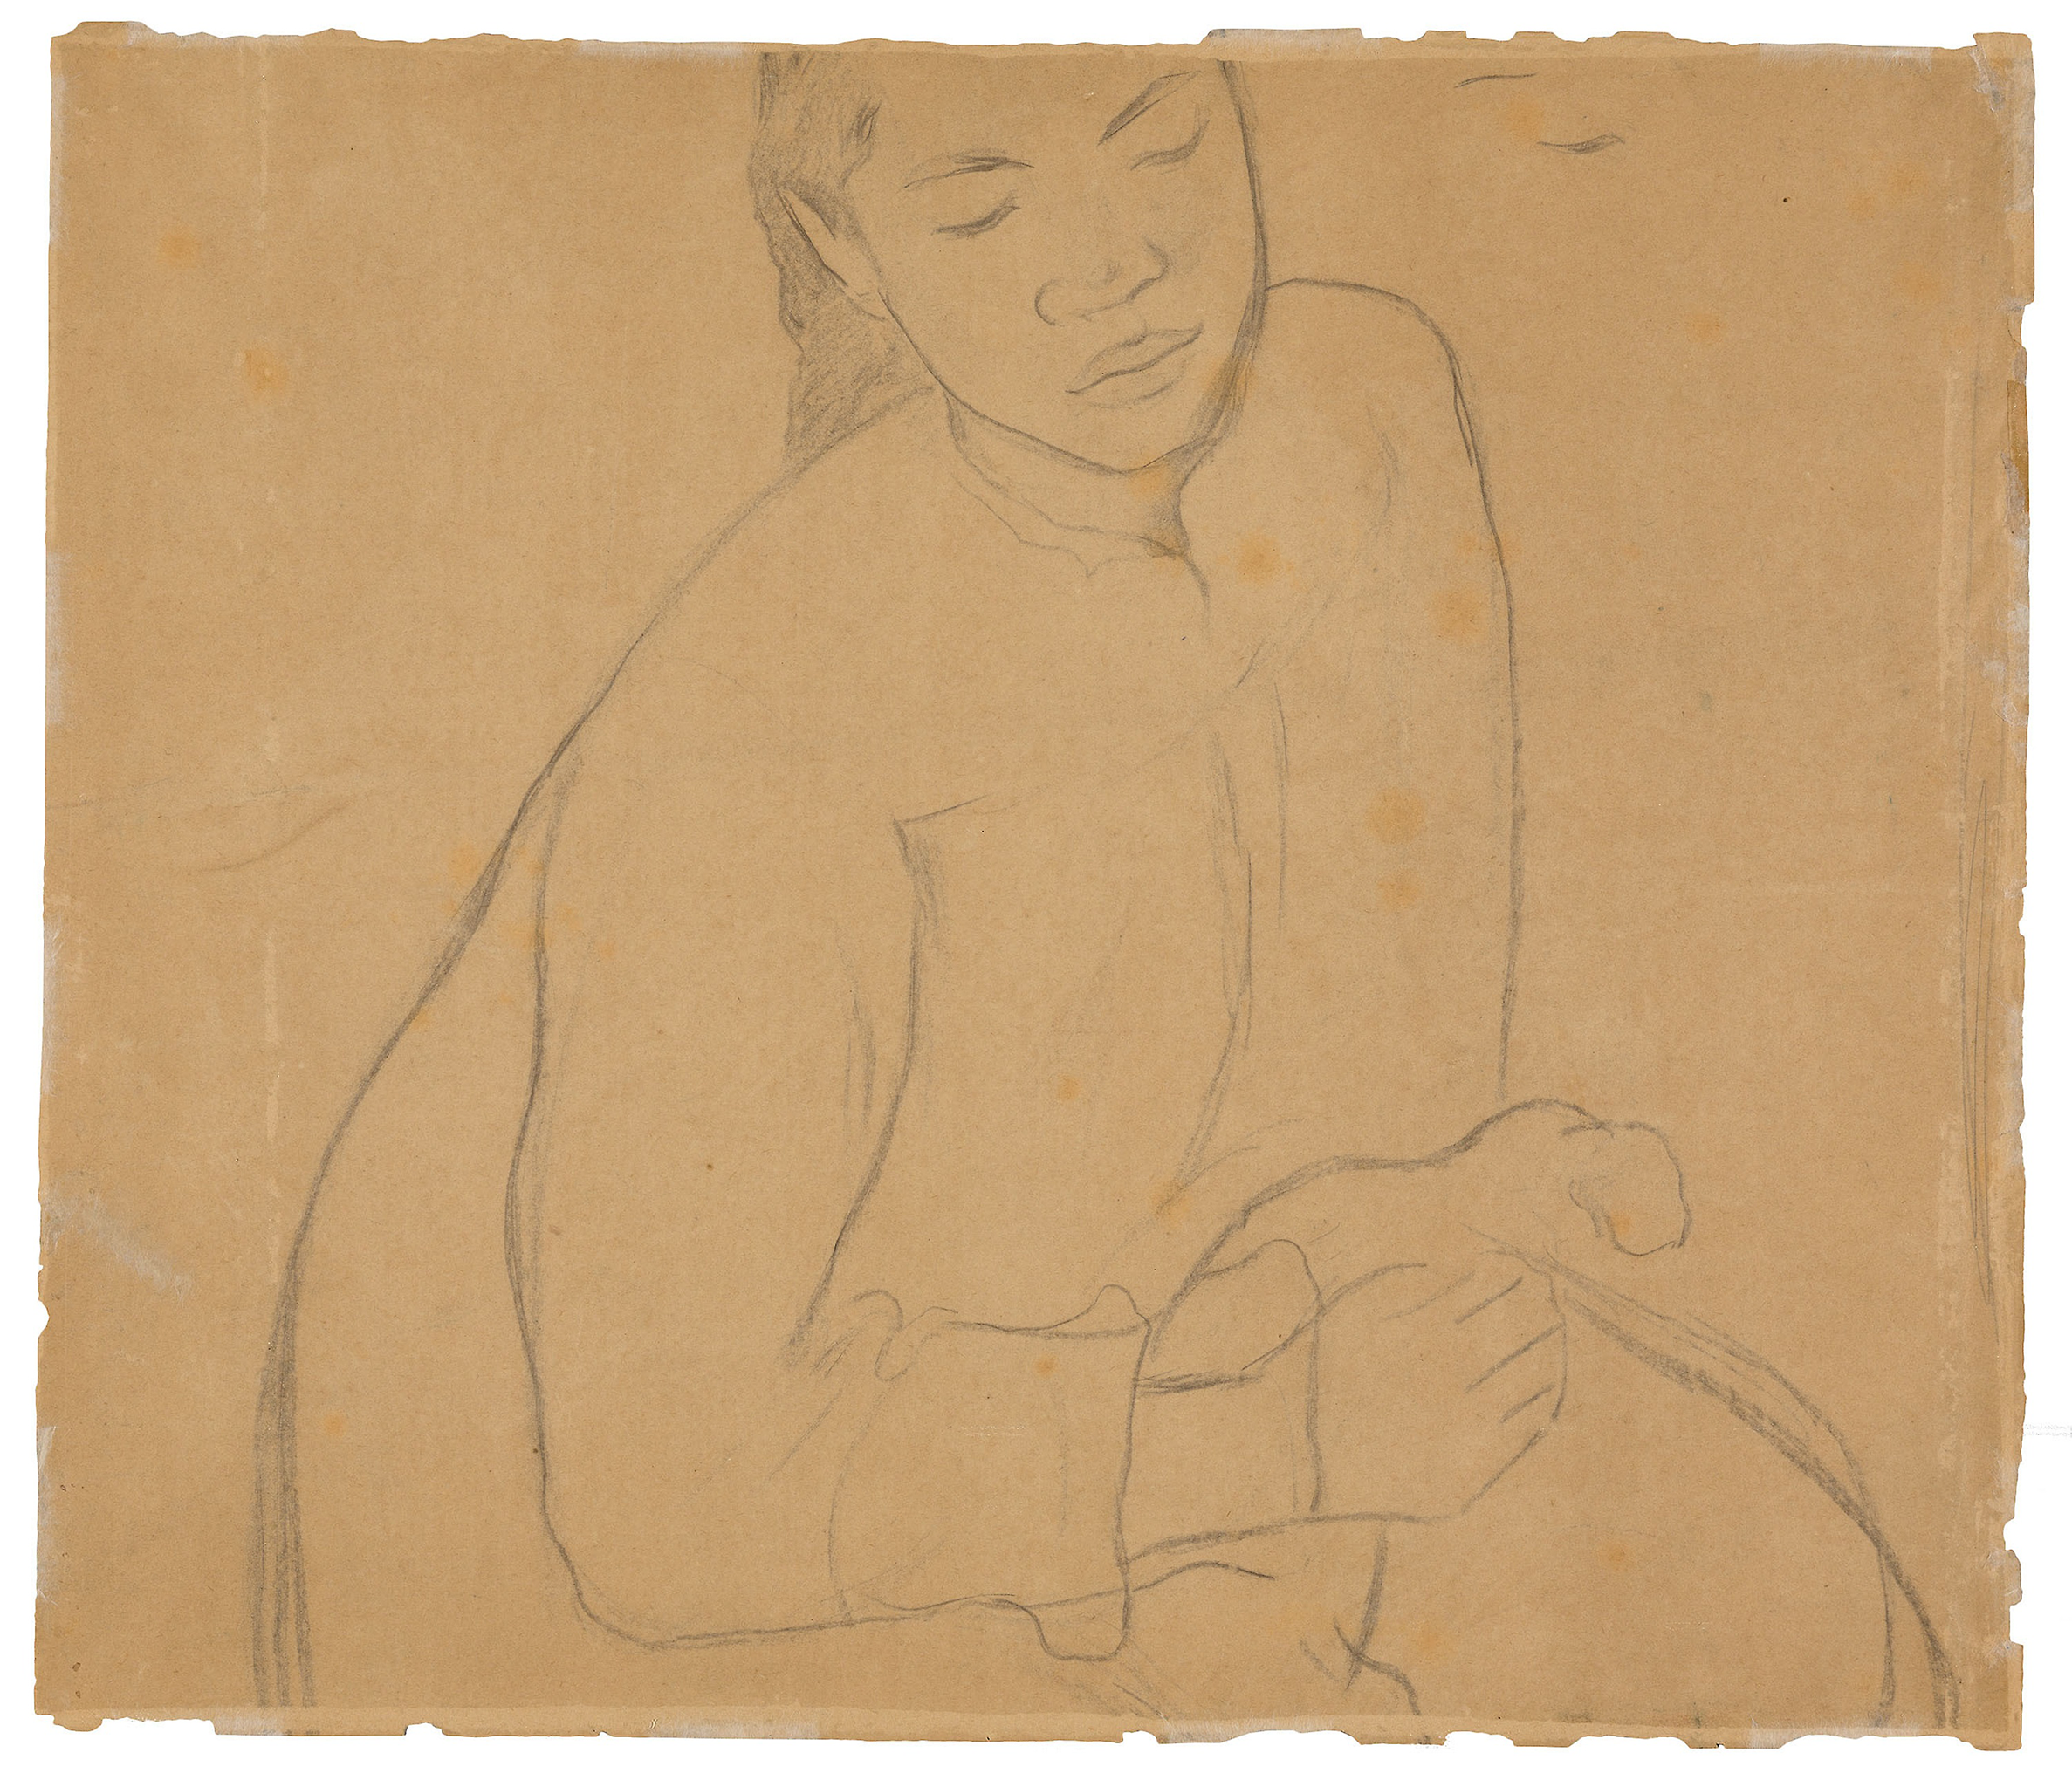 A light sketch of a woman on a light brown paper.